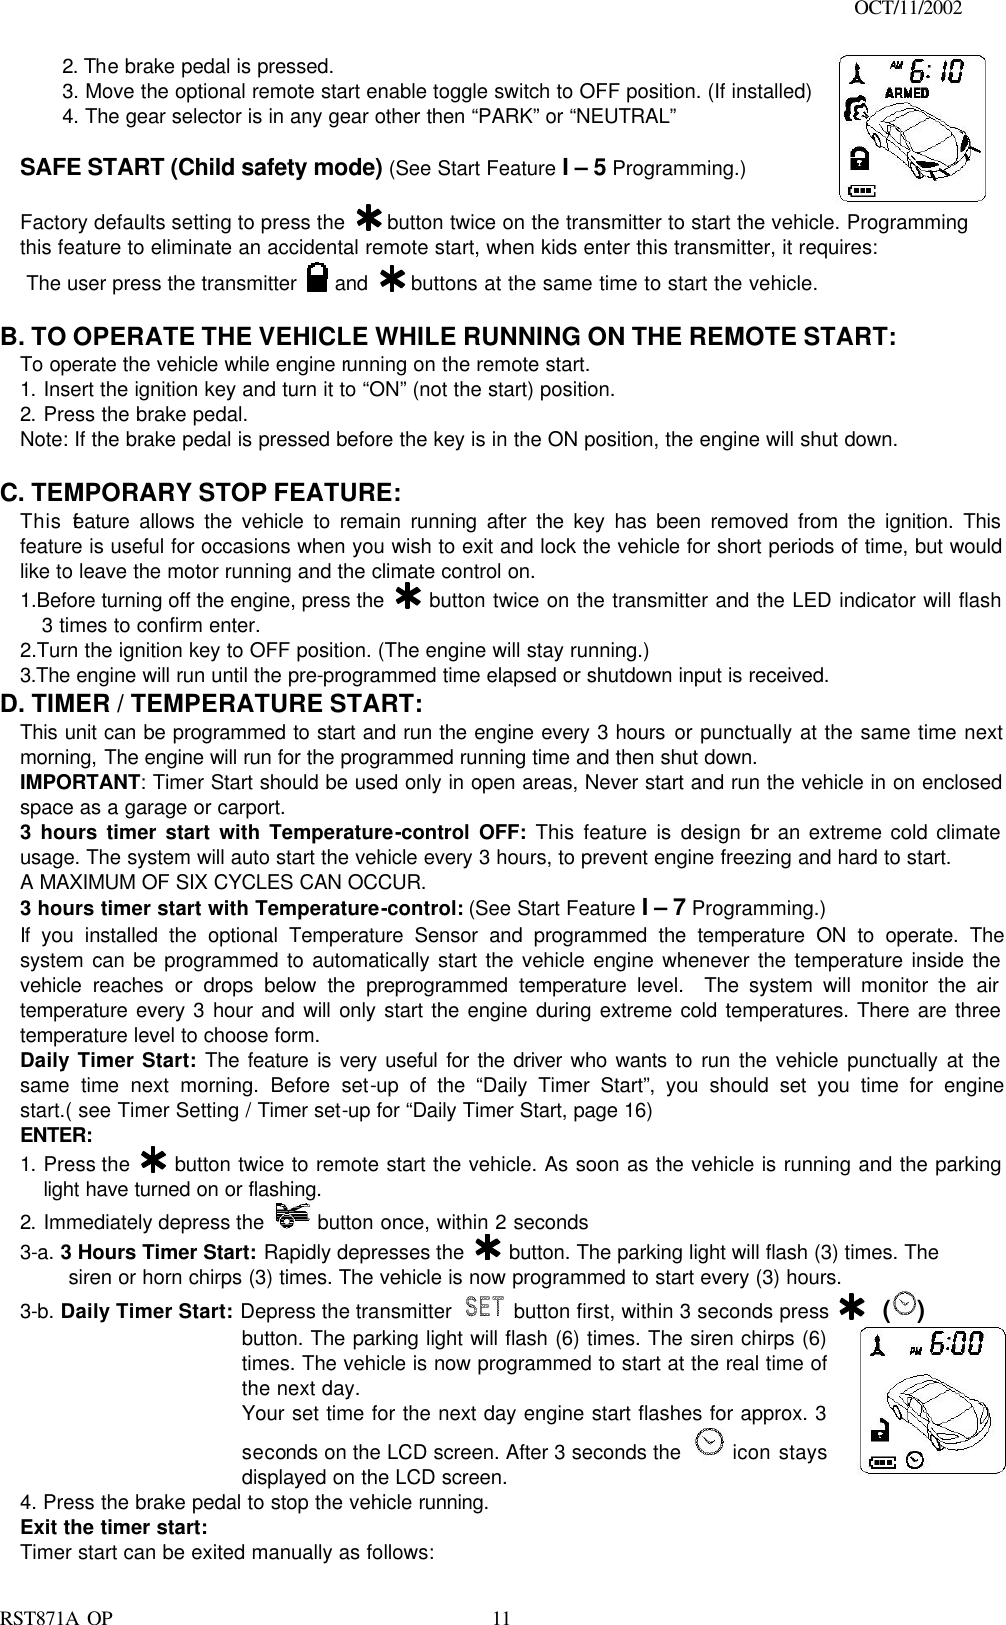                                                                                    OCT/11/2002  RST871A OP   112. The brake pedal is pressed. 3. Move the optional remote start enable toggle switch to OFF position. (If installed) 4. The gear selector is in any gear other then “PARK” or “NEUTRAL”  SAFE START (Child safety mode) (See Start Feature I – 5 Programming.)  Factory defaults setting to press the   button twice on the transmitter to start the vehicle. Programming this feature to eliminate an accidental remote start, when kids enter this transmitter, it requires: The user press the transmitter   and   buttons at the same time to start the vehicle.   B. TO OPERATE THE VEHICLE WHILE RUNNING ON THE REMOTE START: To operate the vehicle while engine running on the remote start. 1. Insert the ignition key and turn it to “ON” (not the start) position. 2. Press the brake pedal. Note: If the brake pedal is pressed before the key is in the ON position, the engine will shut down.  C. TEMPORARY STOP FEATURE: This feature allows the vehicle to remain running after the key has been removed from the ignition. This feature is useful for occasions when you wish to exit and lock the vehicle for short periods of time, but would like to leave the motor running and the climate control on. 1.Before turning off the engine, press the   button twice on the transmitter and the LED indicator will flash 3 times to confirm enter. 2.Turn the ignition key to OFF position. (The engine will stay running.) 3.The engine will run until the pre-programmed time elapsed or shutdown input is received. D. TIMER / TEMPERATURE START:  This unit can be programmed to start and run the engine every 3 hours or punctually at the same time next morning, The engine will run for the programmed running time and then shut down. IMPORTANT: Timer Start should be used only in open areas, Never start and run the vehicle in on enclosed space as a garage or carport. 3 hours timer start with Temperature-control OFF: This feature is design for an extreme cold climate usage. The system will auto start the vehicle every 3 hours, to prevent engine freezing and hard to start. A MAXIMUM OF SIX CYCLES CAN OCCUR.  3 hours timer start with Temperature-control: (See Start Feature I – 7 Programming.) If you installed the optional Temperature Sensor and programmed the temperature ON to operate. The system can be programmed to automatically start the vehicle engine whenever the temperature inside the vehicle reaches or drops below the preprogrammed temperature level.  The system will monitor the air temperature every 3 hour and will only start the engine during extreme cold temperatures. There are three temperature level to choose form. Daily Timer Start: The feature is very useful for the driver who wants to run the vehicle punctually at the same time next morning. Before set-up of the “Daily Timer Start”, you should set you time for engine start.( see Timer Setting / Timer set-up for “Daily Timer Start, page 16) ENTER: 1. Press the   button twice to remote start the vehicle. As soon as the vehicle is running and the parking light have turned on or flashing. 2. Immediately depress the   button once, within 2 seconds 3-a. 3 Hours Timer Start: Rapidly depresses the   button. The parking light will flash (3) times. The    siren or horn chirps (3) times. The vehicle is now programmed to start every (3) hours. 3-b. Daily Timer Start: Depress the transmitter   button first, within 3 seconds press    ()   button. The parking light will flash (6) times. The siren chirps (6) times. The vehicle is now programmed to start at the real time of the next day. Your set time for the next day engine start flashes for approx. 3 seconds on the LCD screen. After 3 seconds the  icon stays displayed on the LCD screen.  4. Press the brake pedal to stop the vehicle running. Exit the timer start: Timer start can be exited manually as follows: 